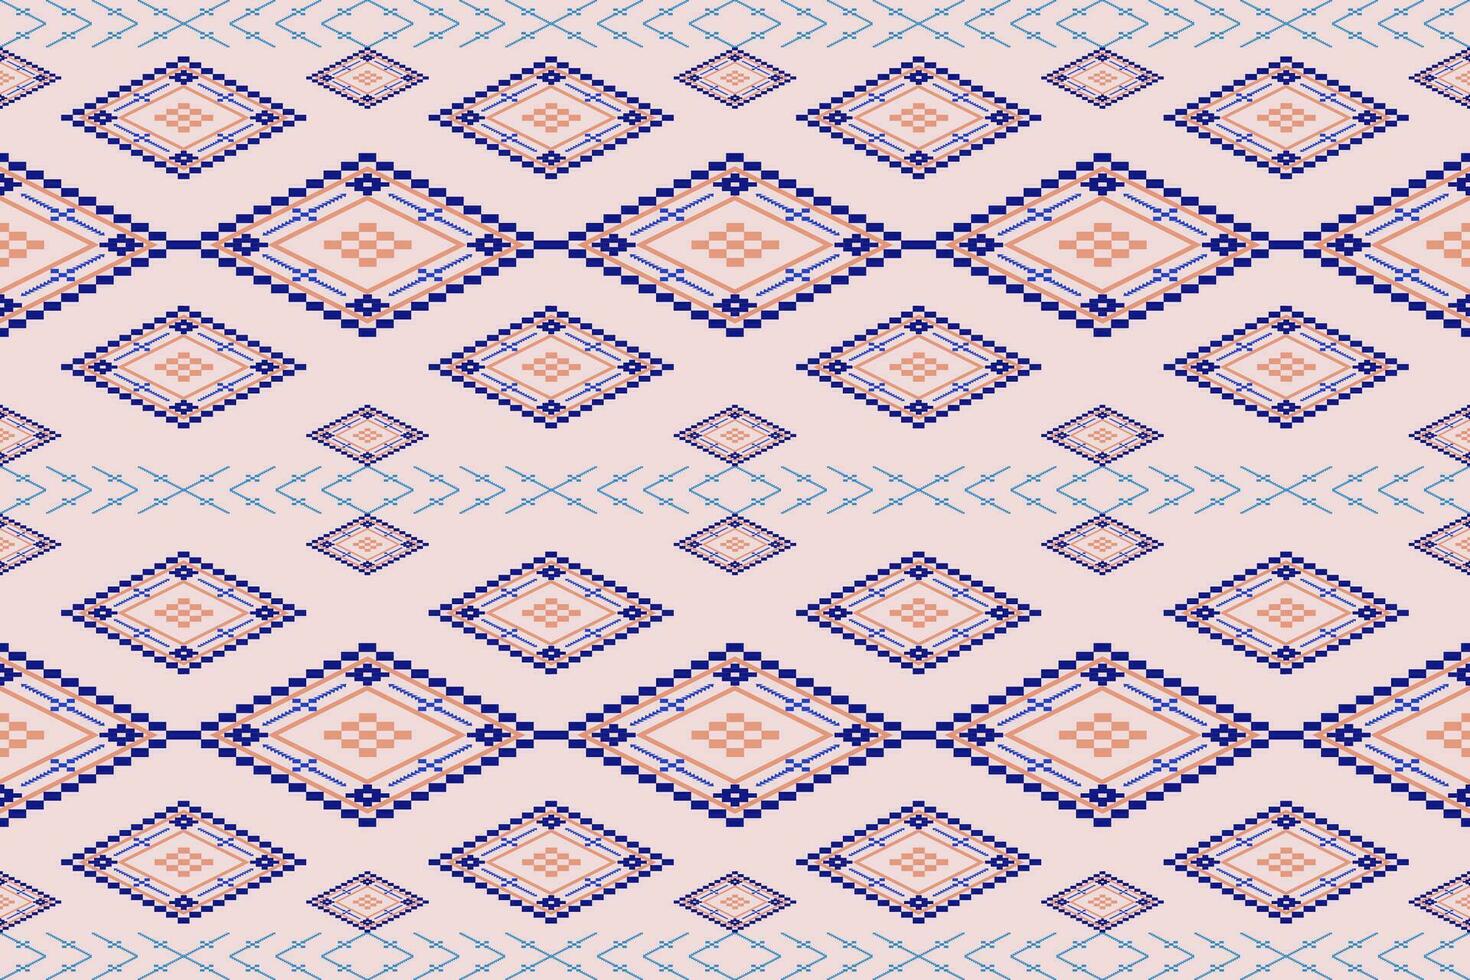 Geometric ethnic pattern vector illustration background.Seamless pattern traditional.Colorful ethnic pattern.Design for background,wallpaper,batik,fabric,carpet,clothing,wrapping,textile.